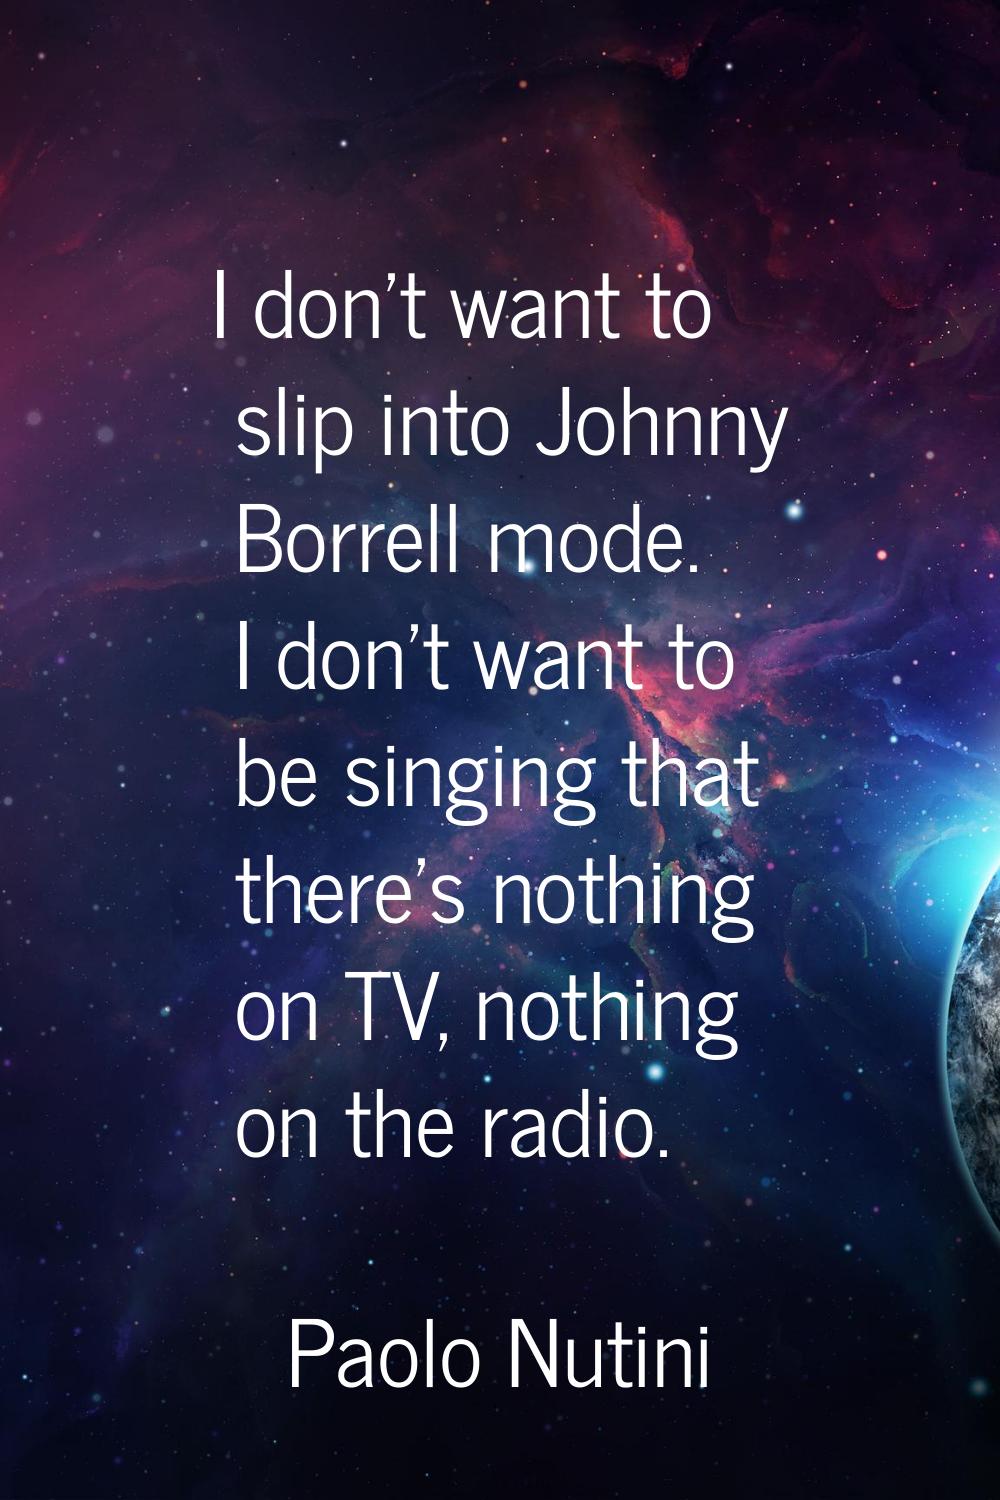 I don't want to slip into Johnny Borrell mode. I don't want to be singing that there's nothing on T